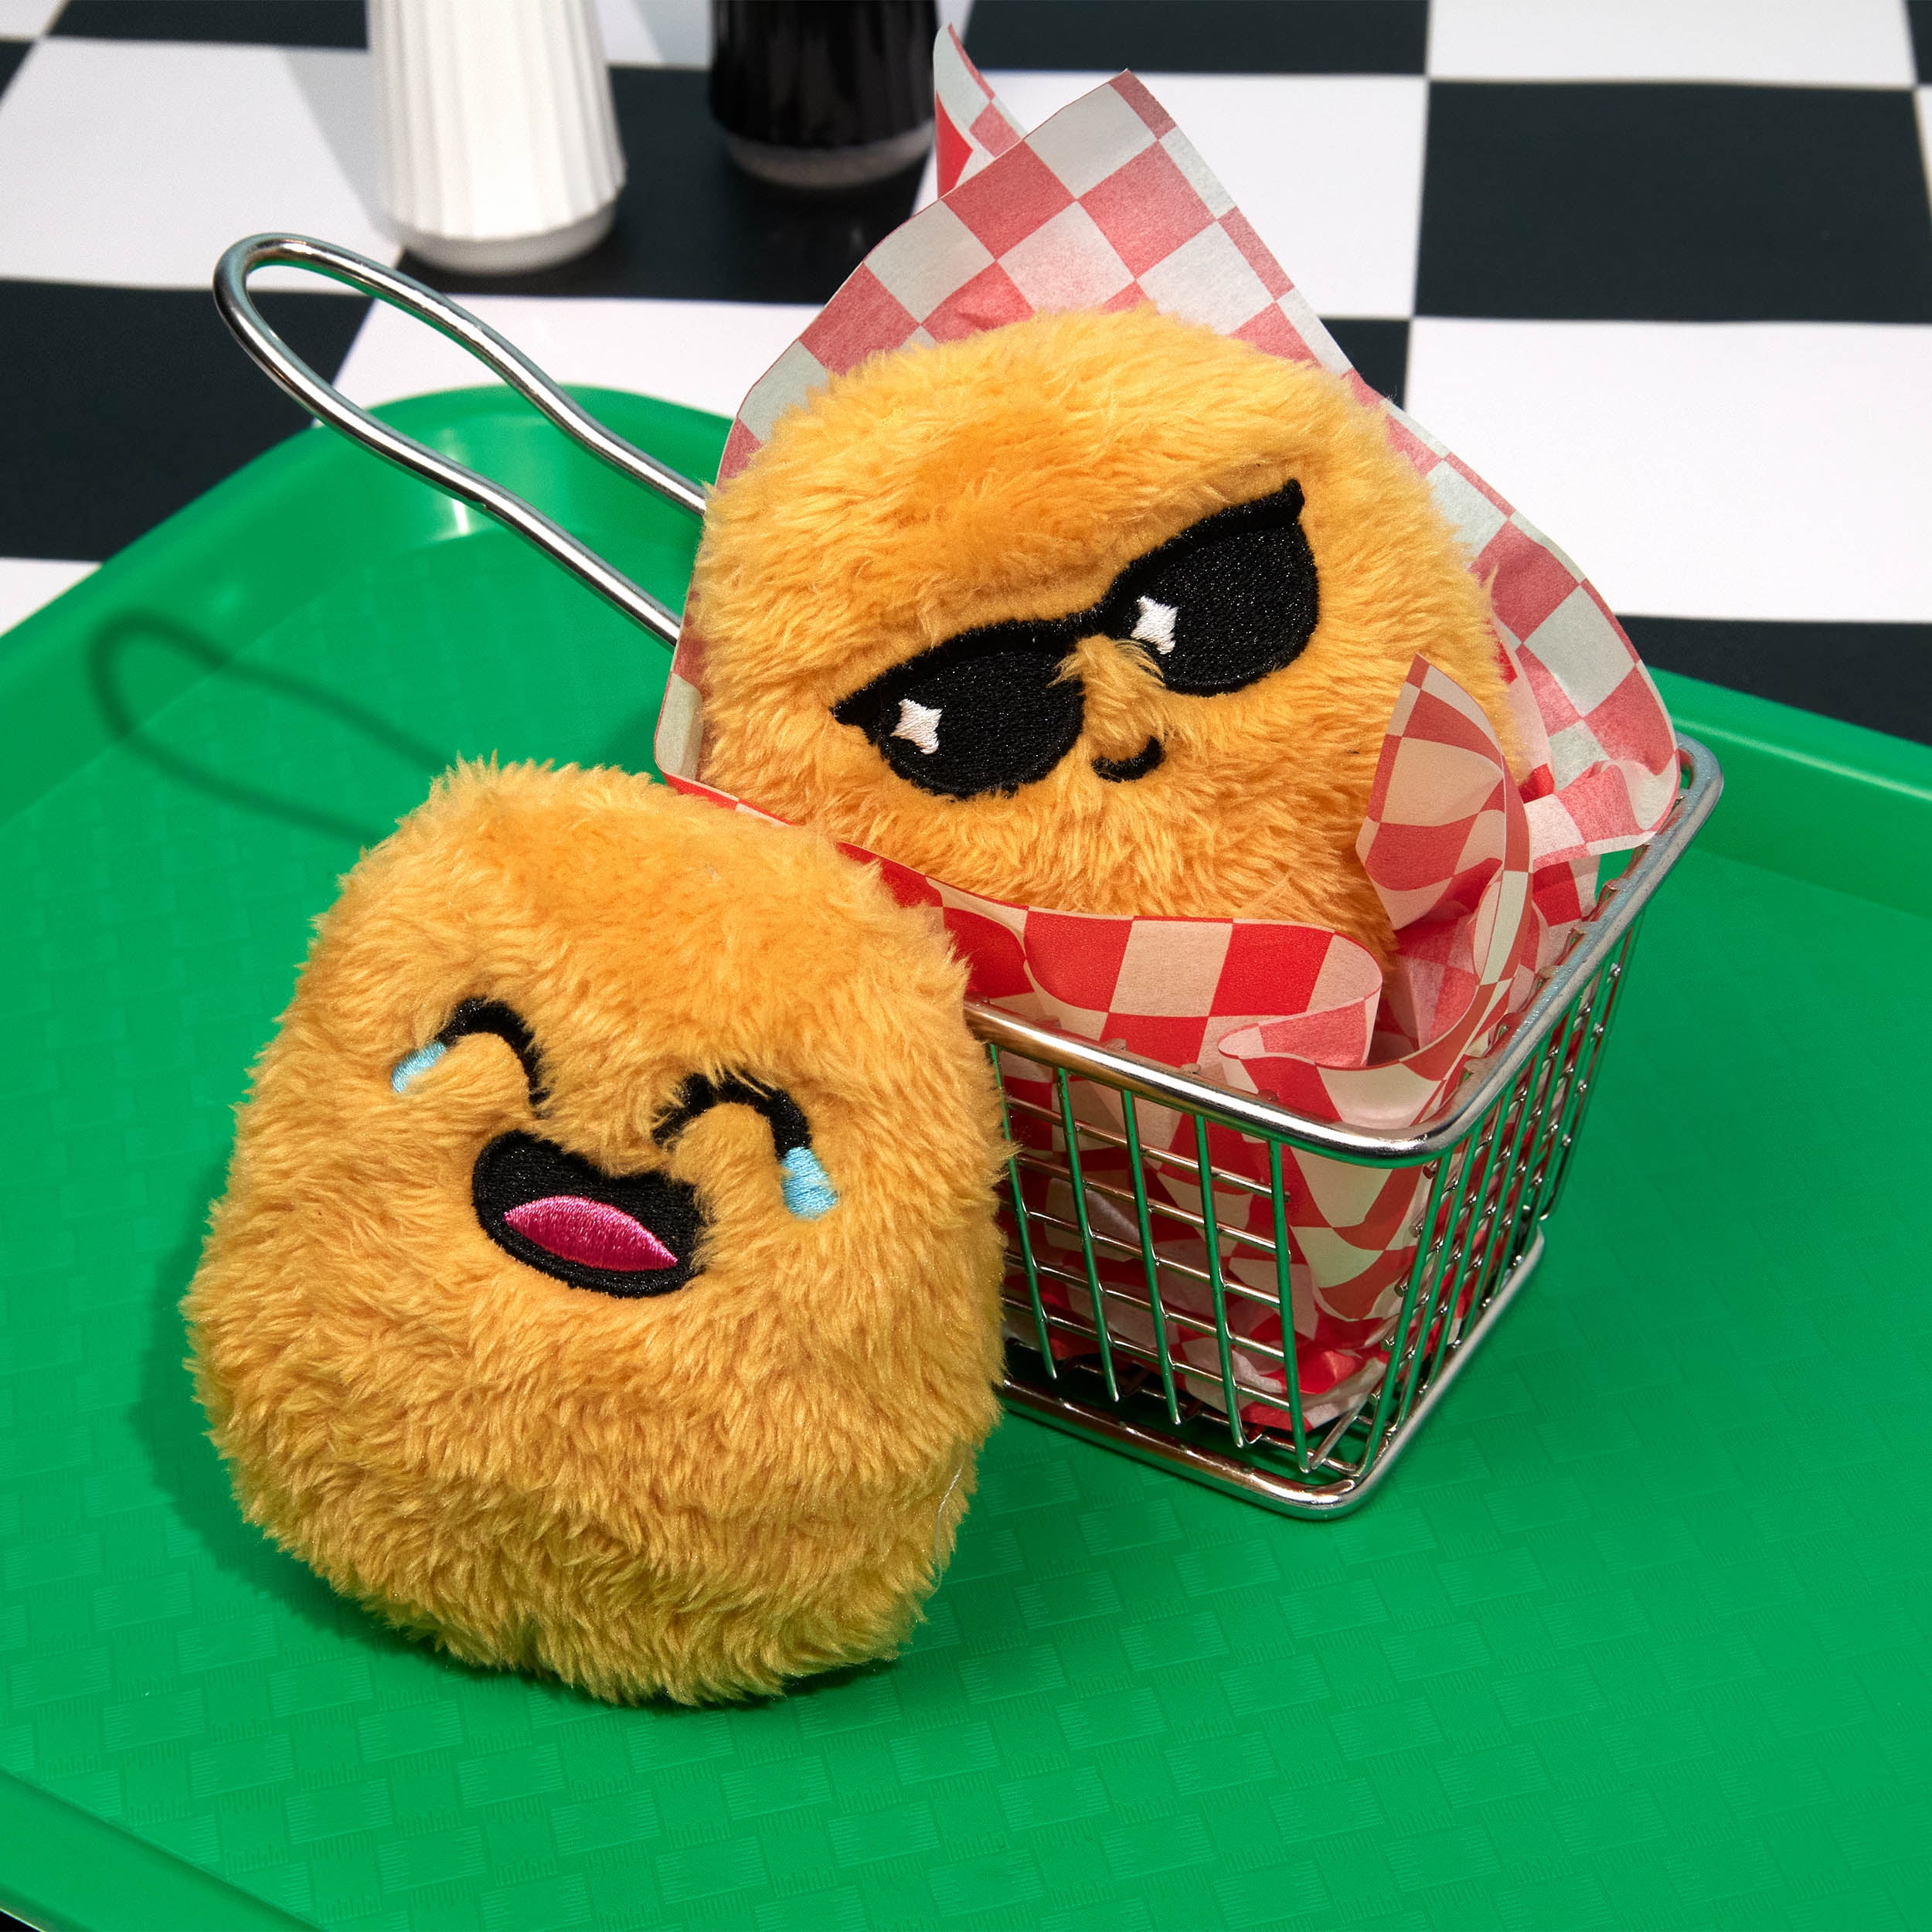 I think everyone needs emotional support nuggets and fries in their li, emotional support plushies